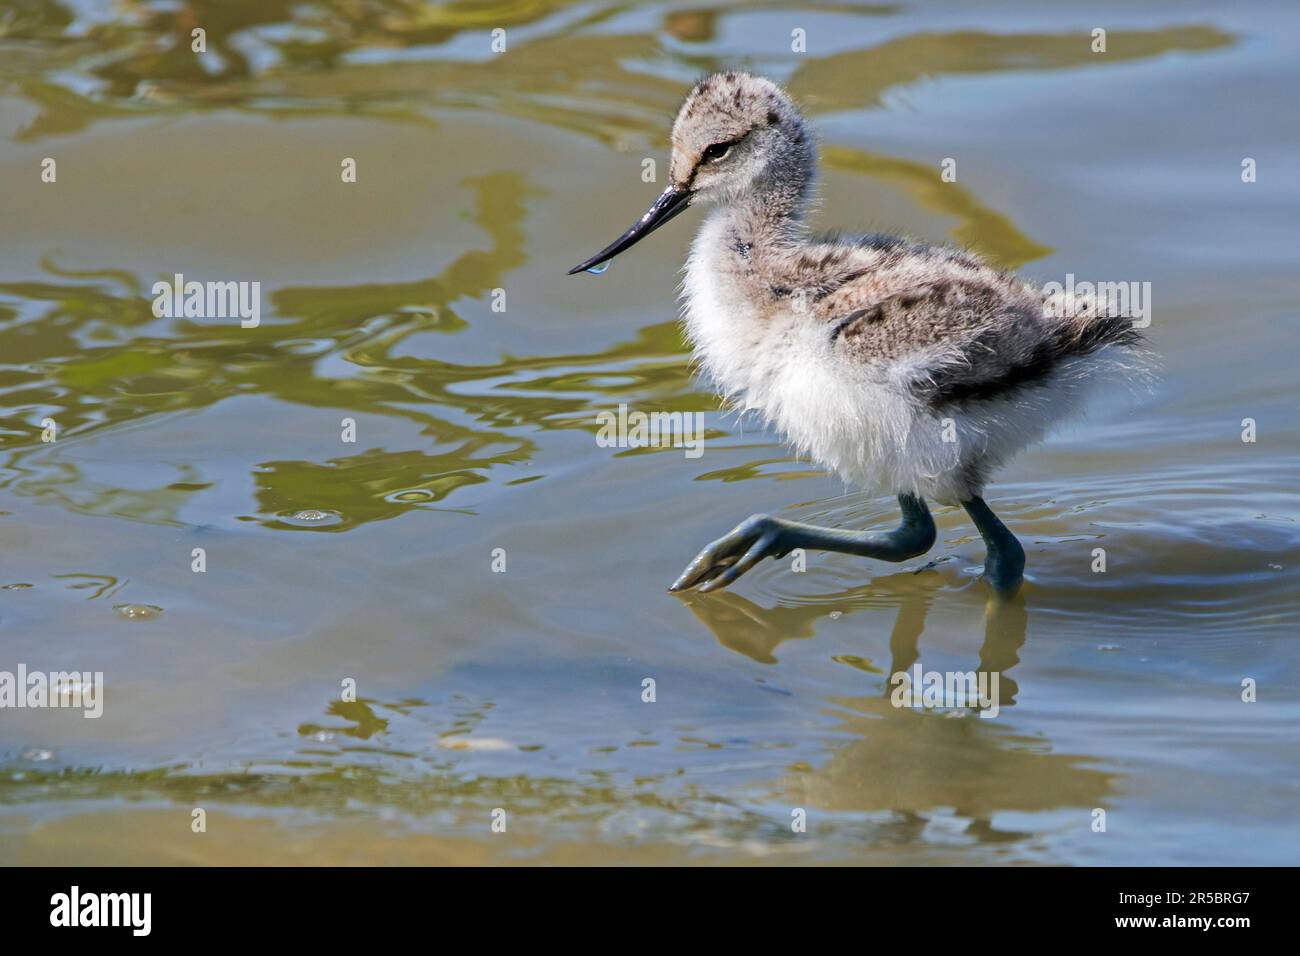 Pied avocet (Recurvirostra avosetta) chick foraging in shallow water of pond in spring Stock Photo